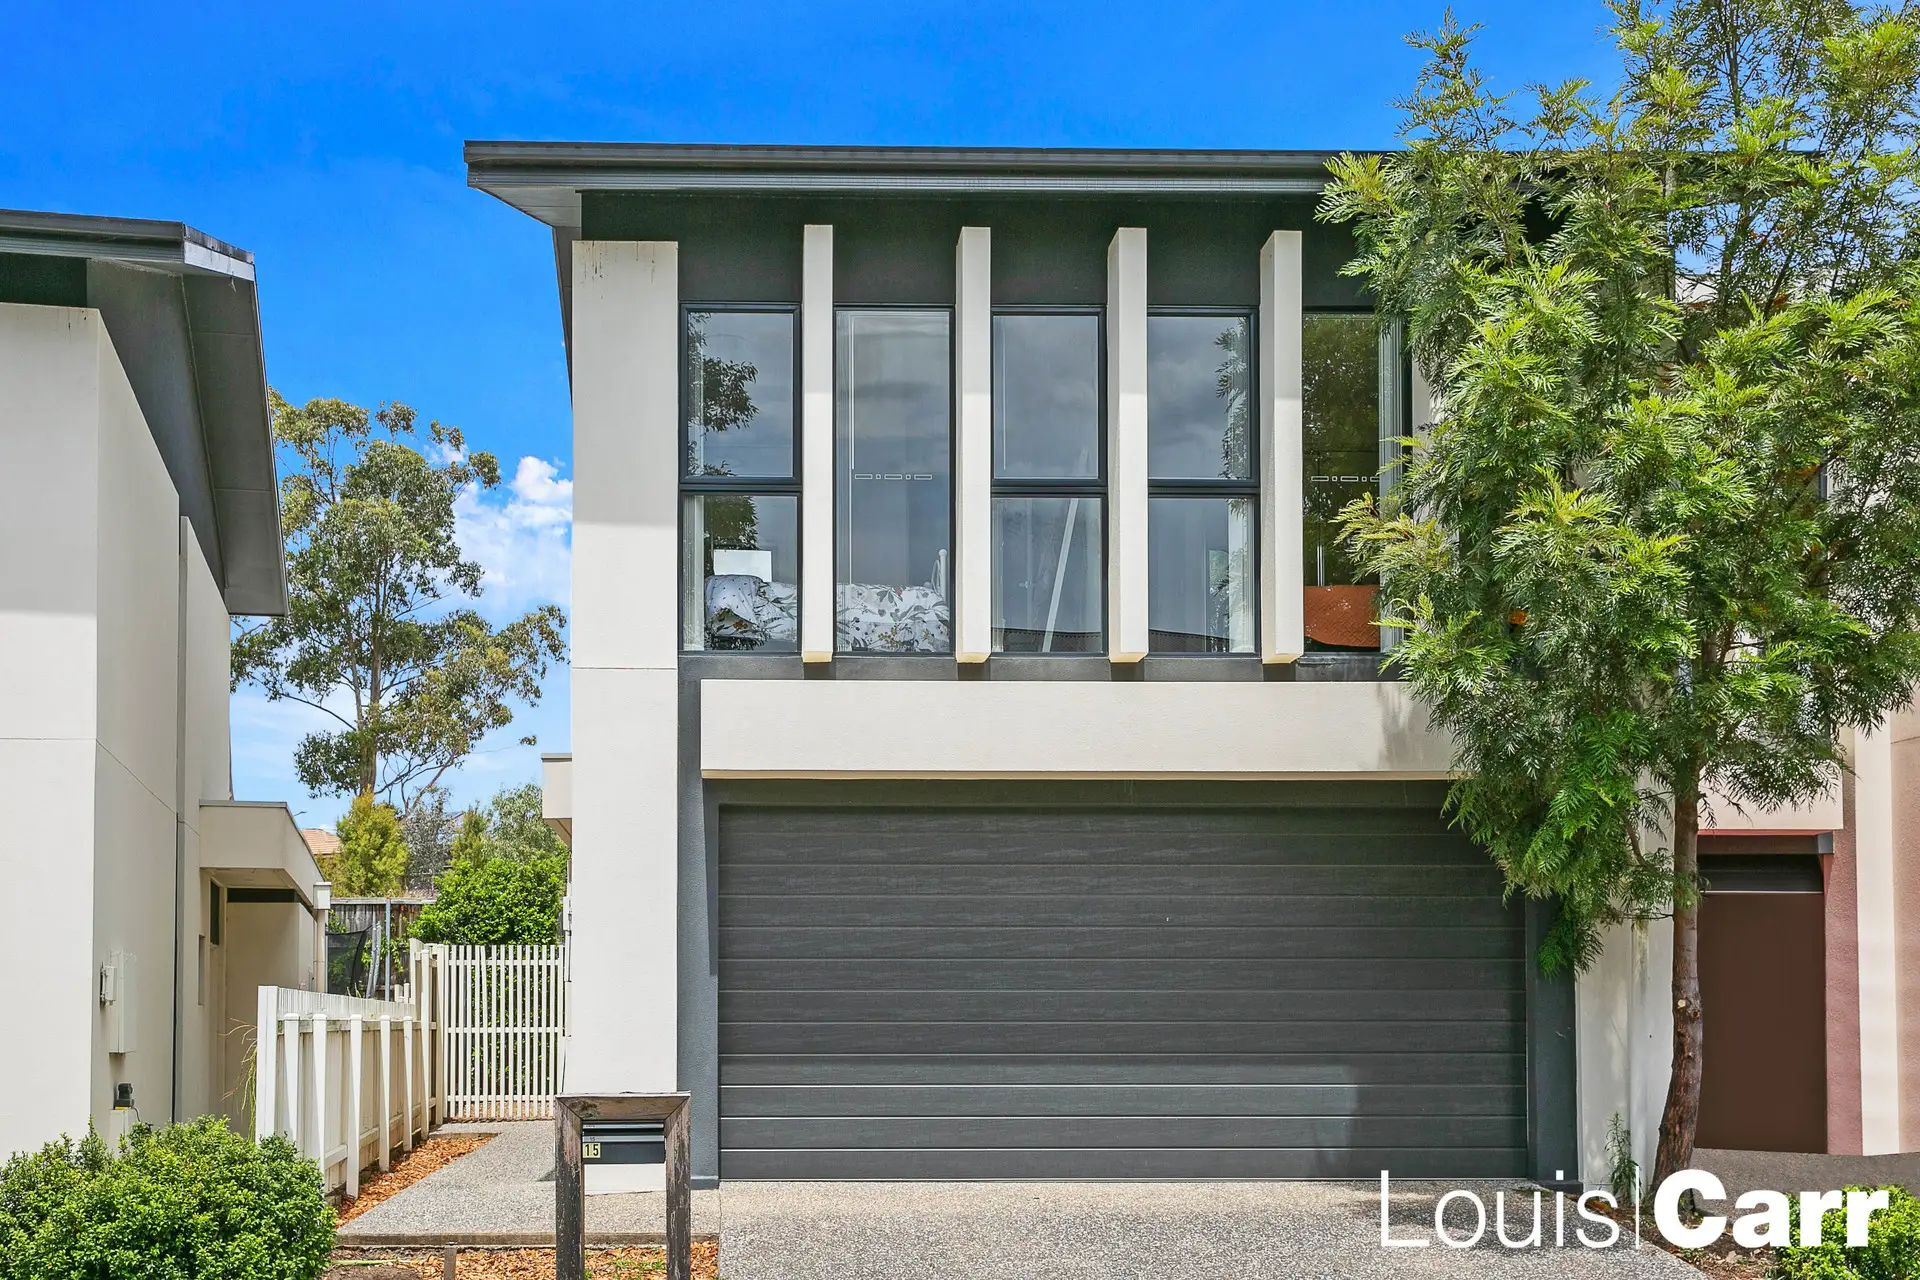 Photo #1: 15 Grace Crescent, Kellyville - Sold by Louis Carr Real Estate